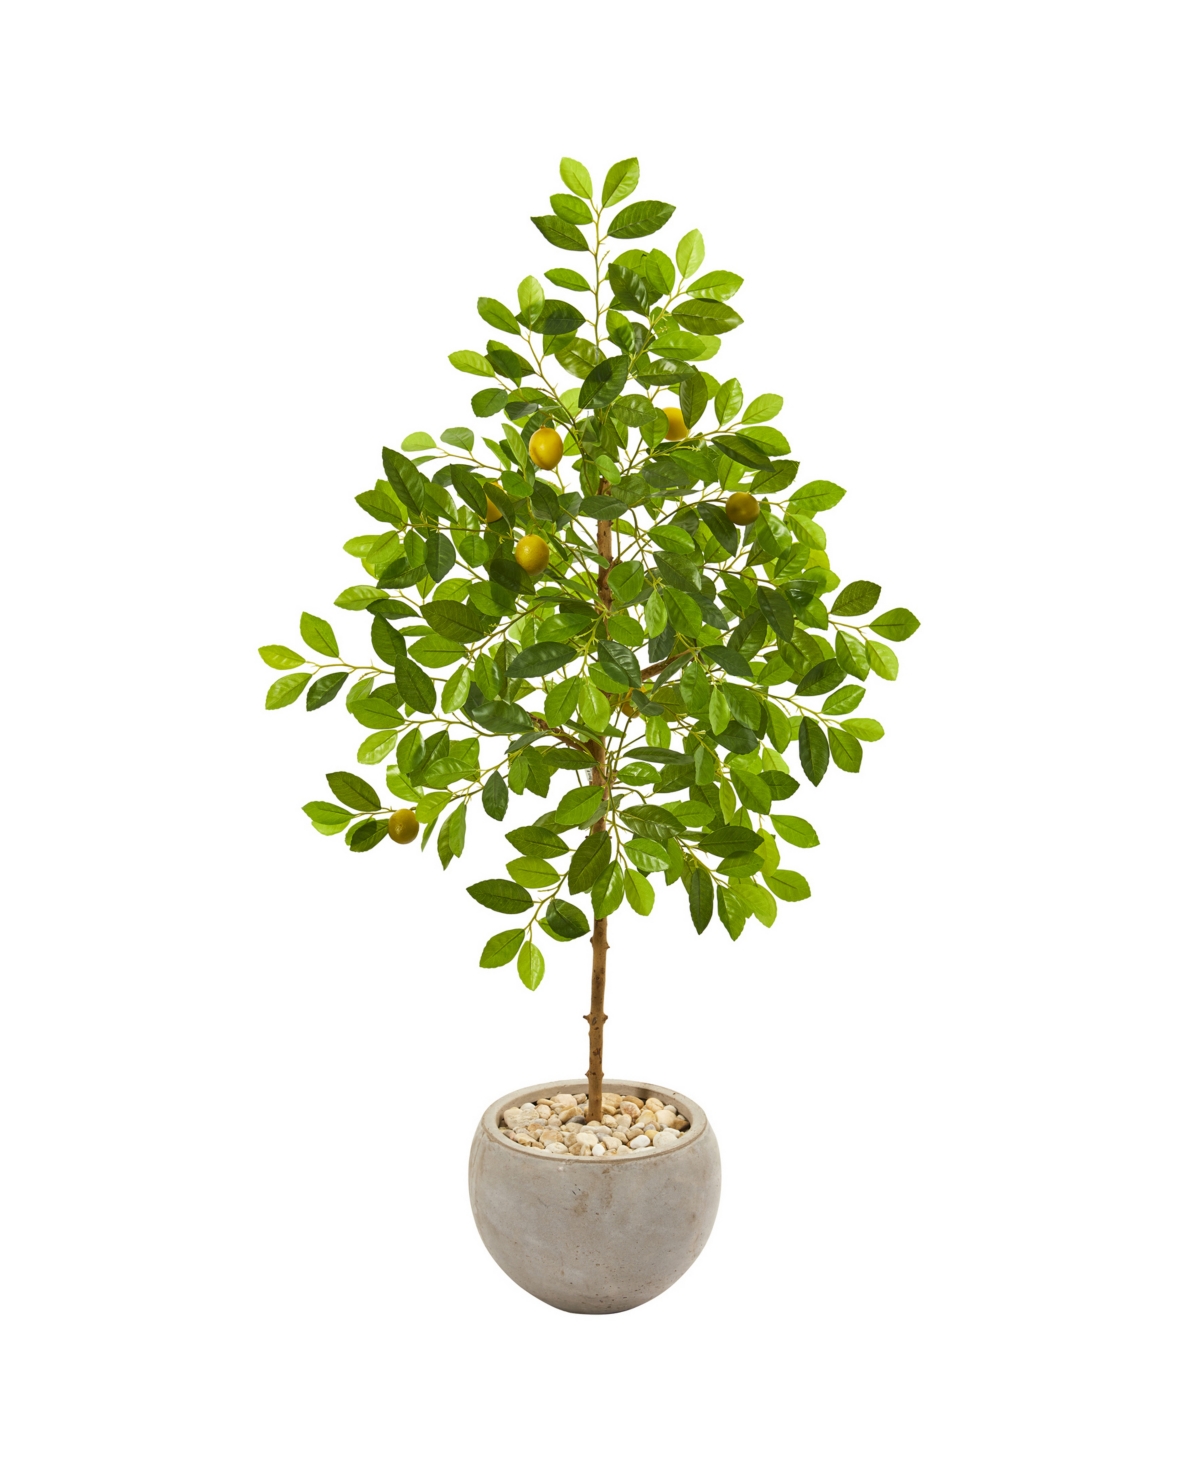 54" Lemon Artificial Tree in Sand Colored Planter - Green